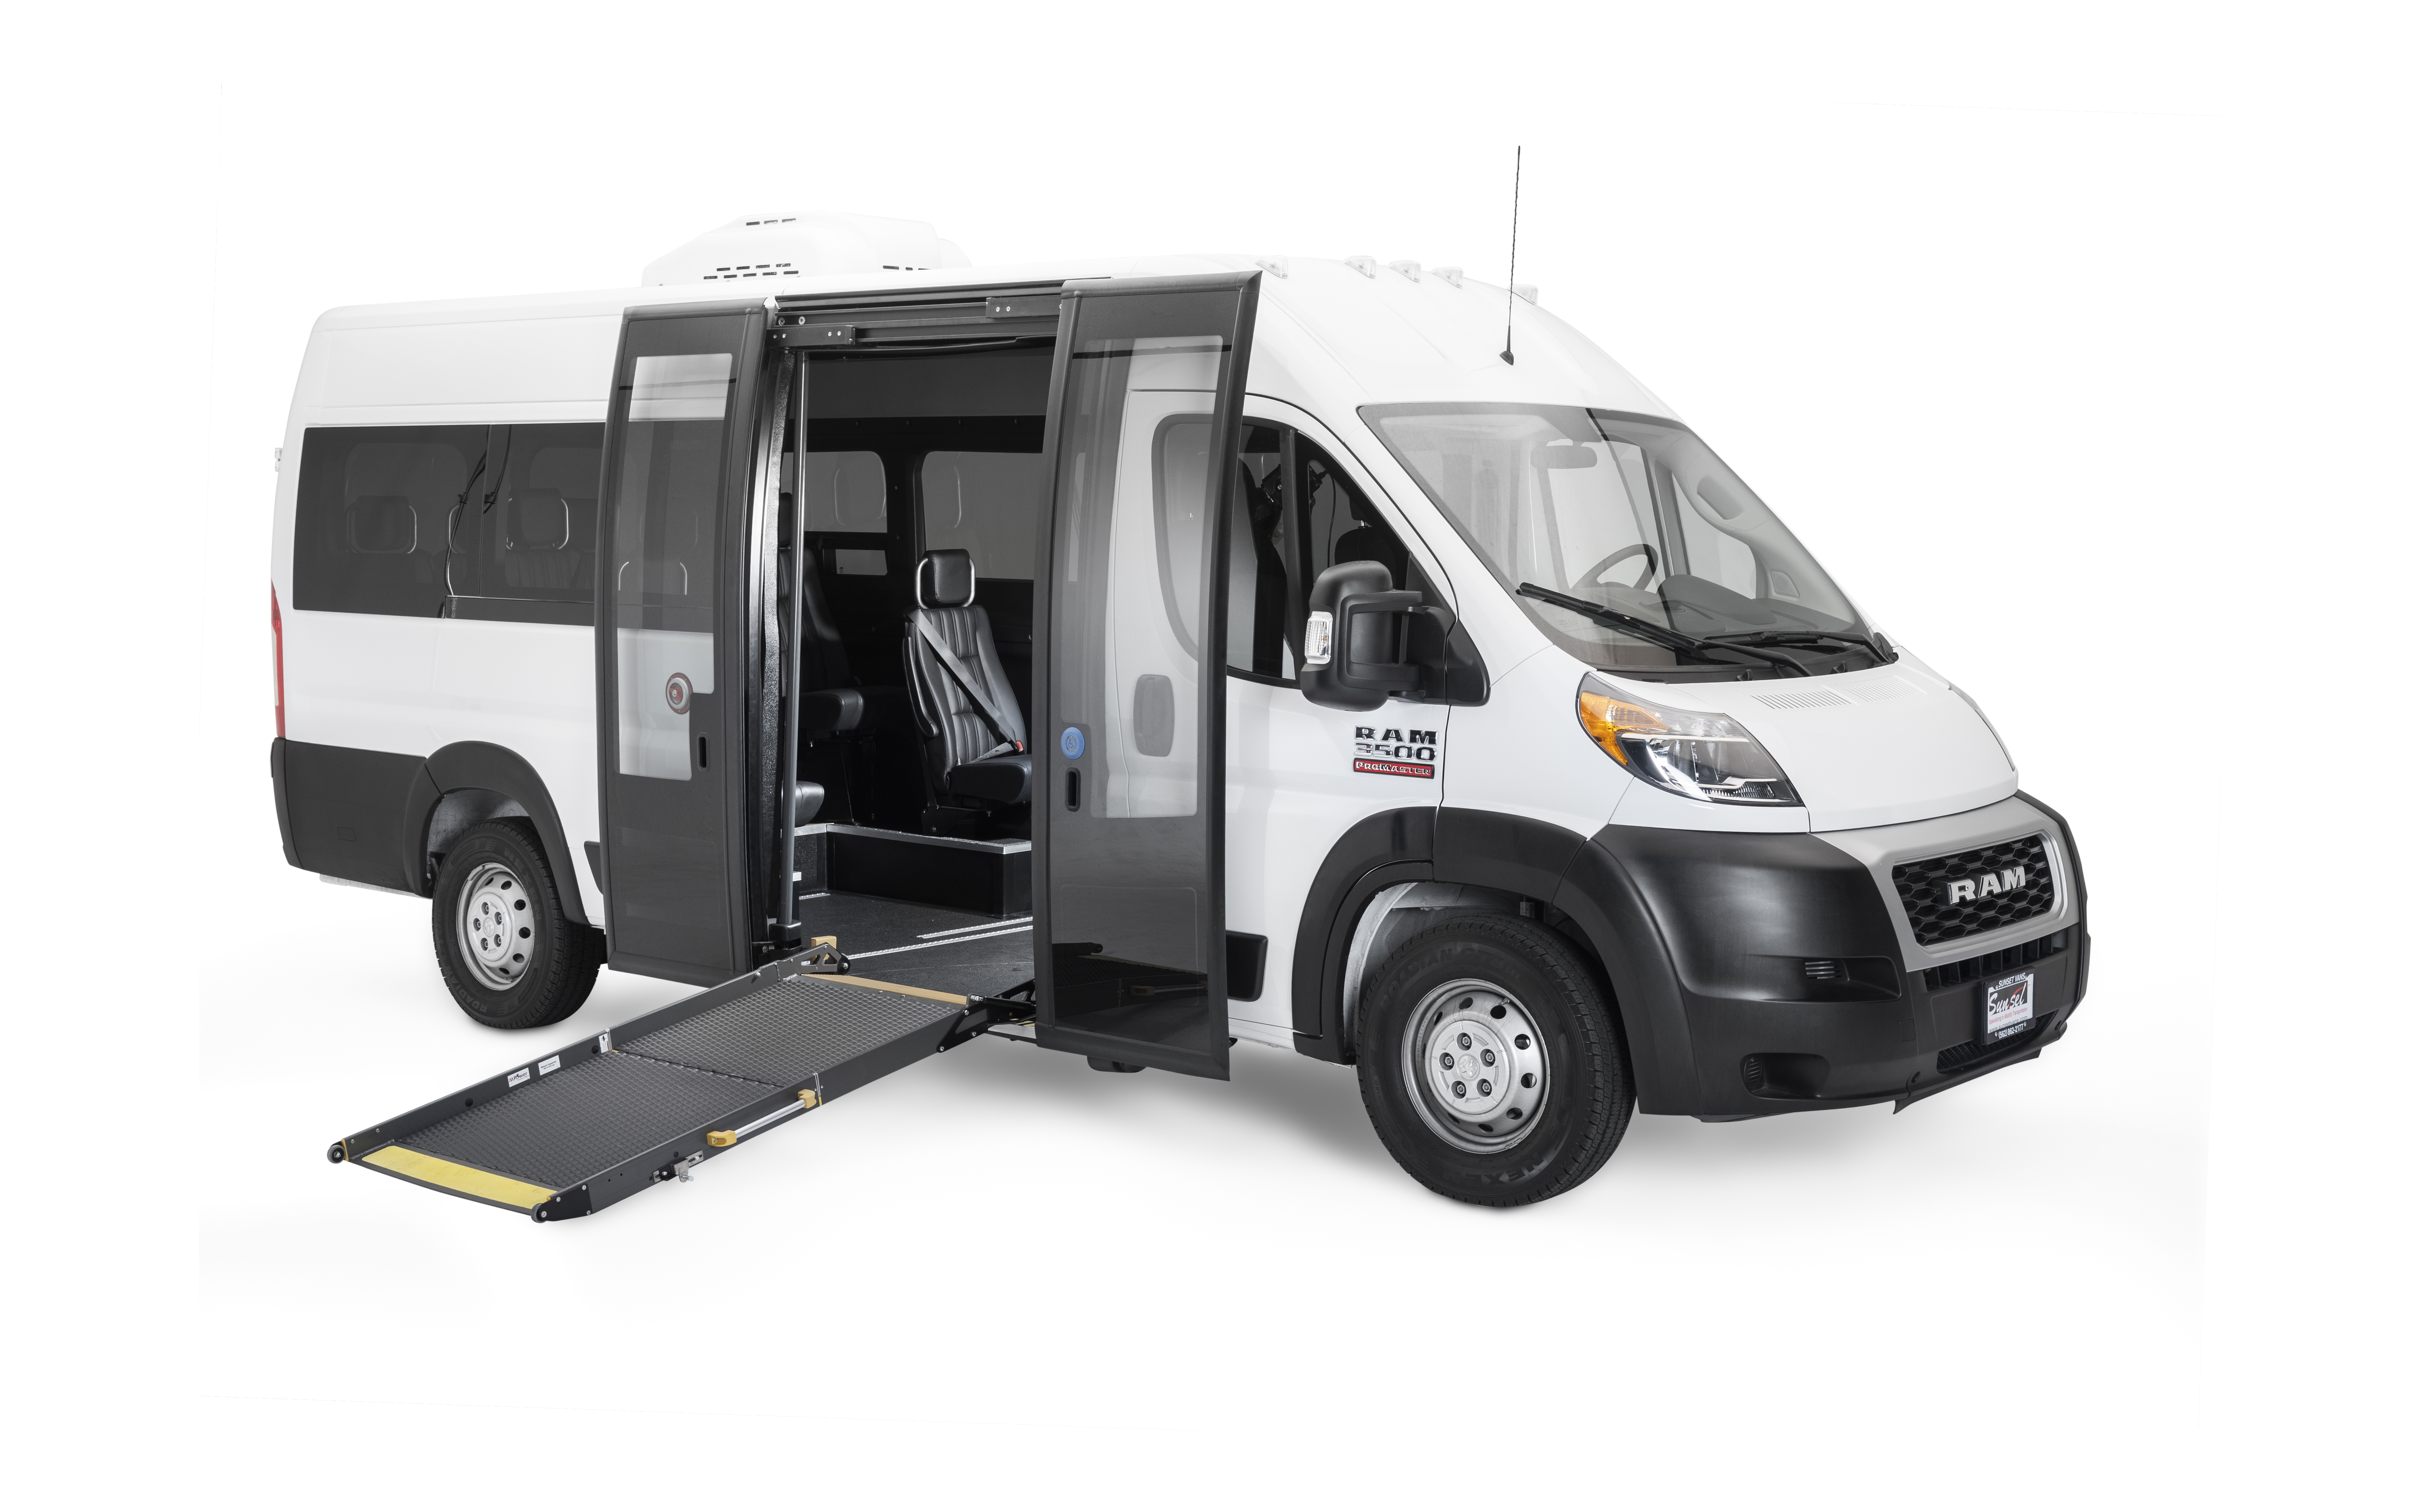 Sunset Vans Looks to Revolutionize the Mobility Transportation Industry with Forward-Thinking Technology